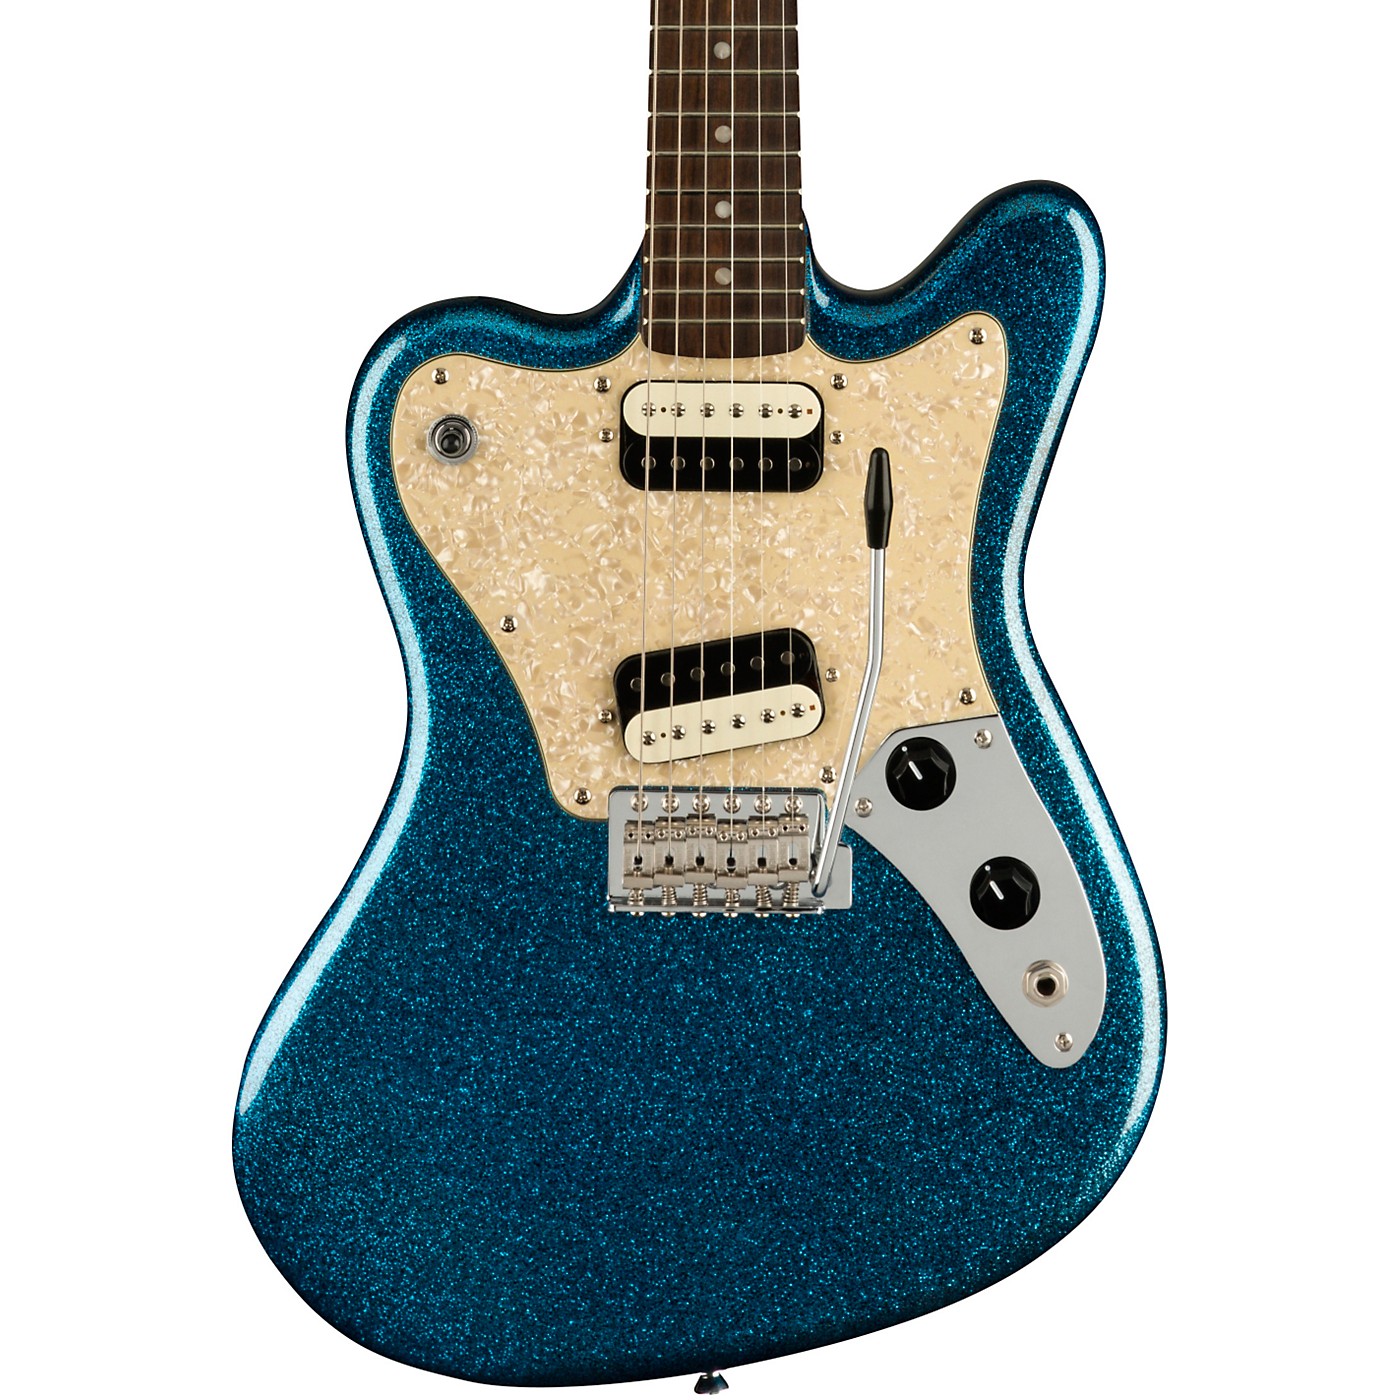 Squier Paranormal Series Super-Sonic Electric Guitar thumbnail